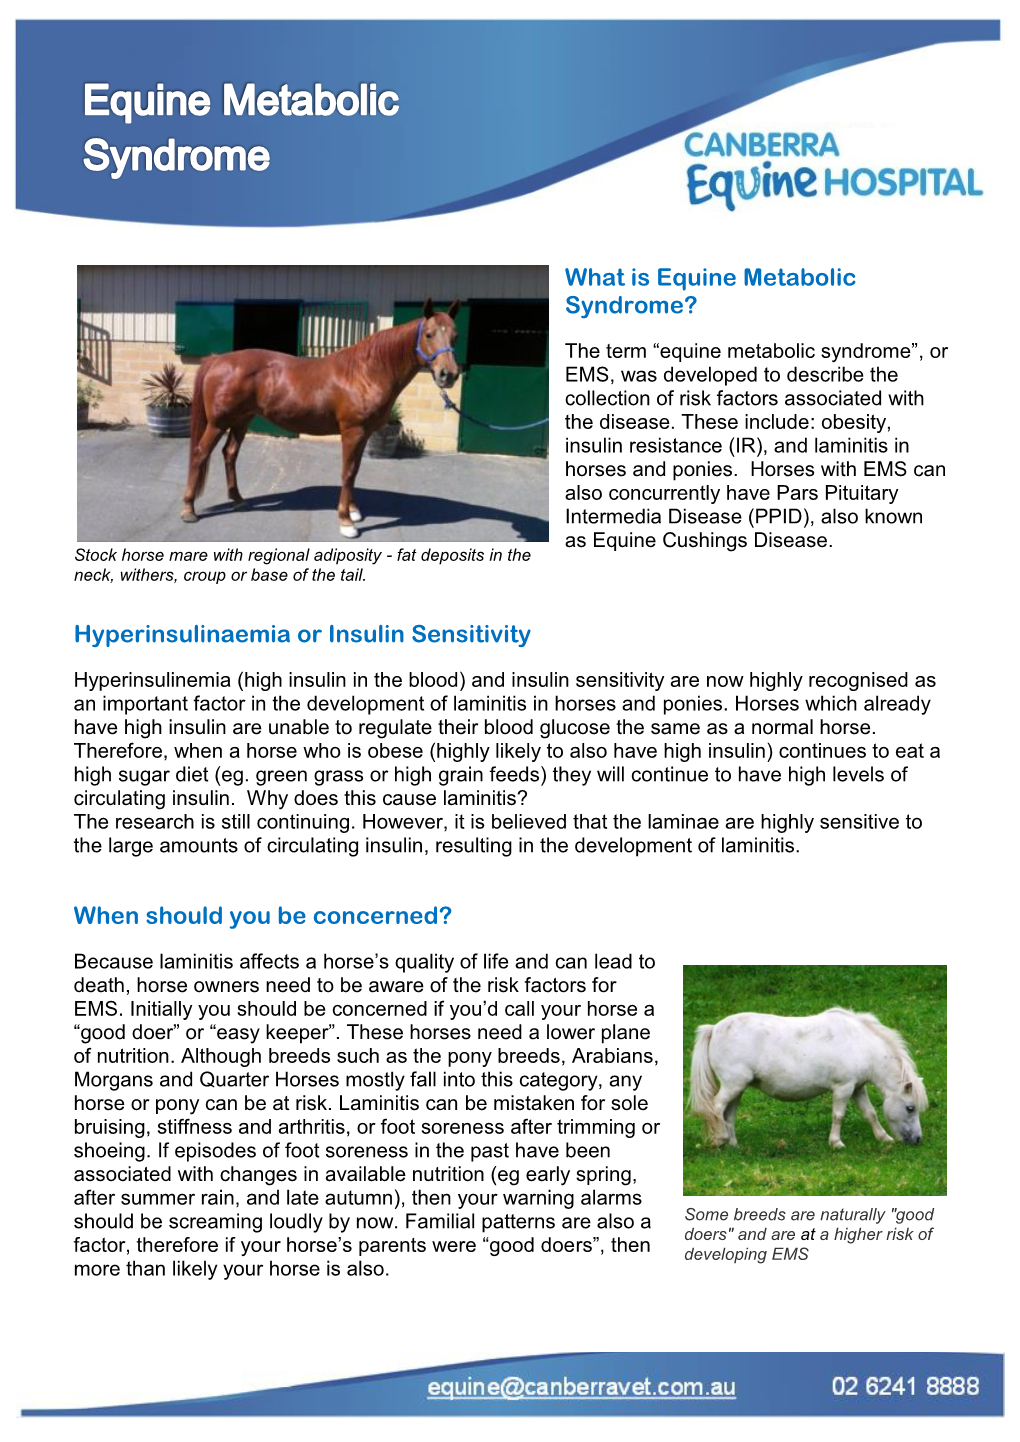 What Is Equine Metabolic Syndrome?